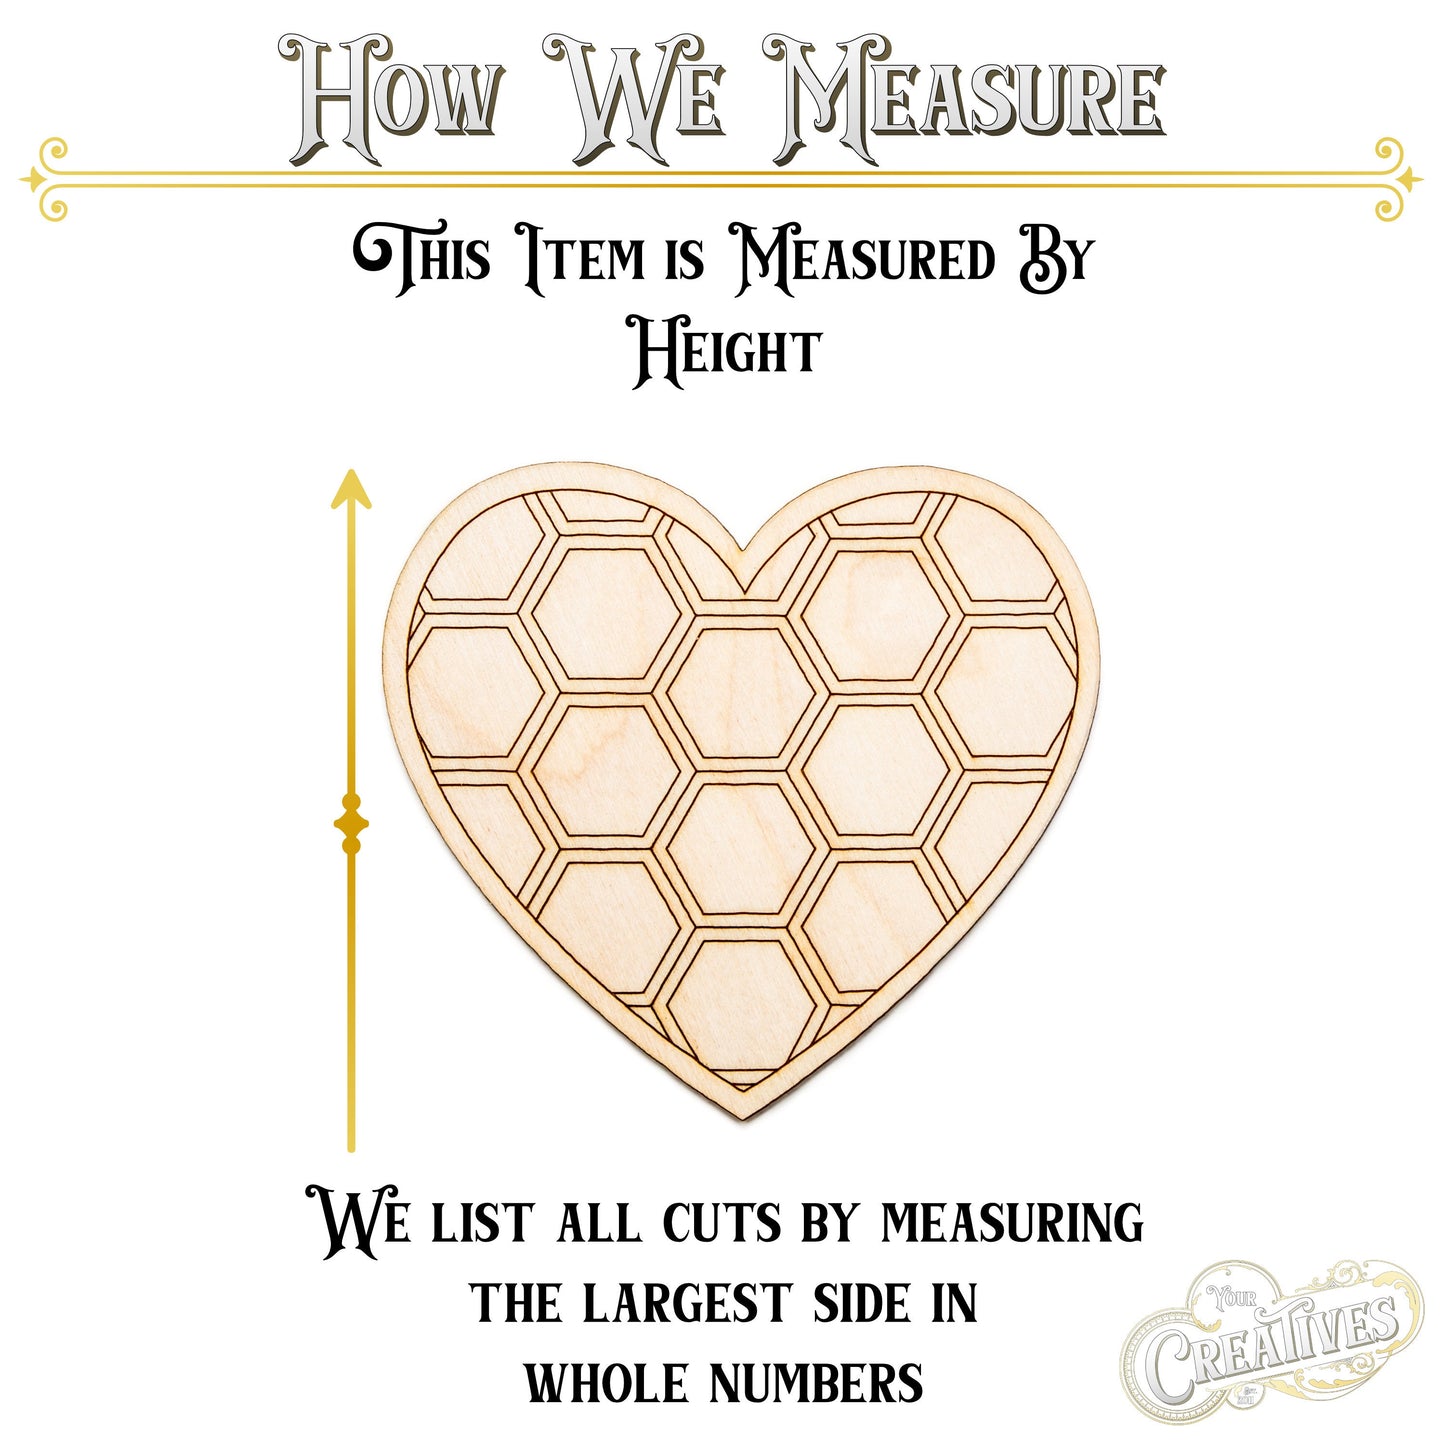 Honeycomb Heart-Solid-Wood Cutout-Honeycomb Theme Decor-Various Sizes-Solid Line Etch Design-Honey Heart-Bee Theme Wood Decor-Hearts Decor